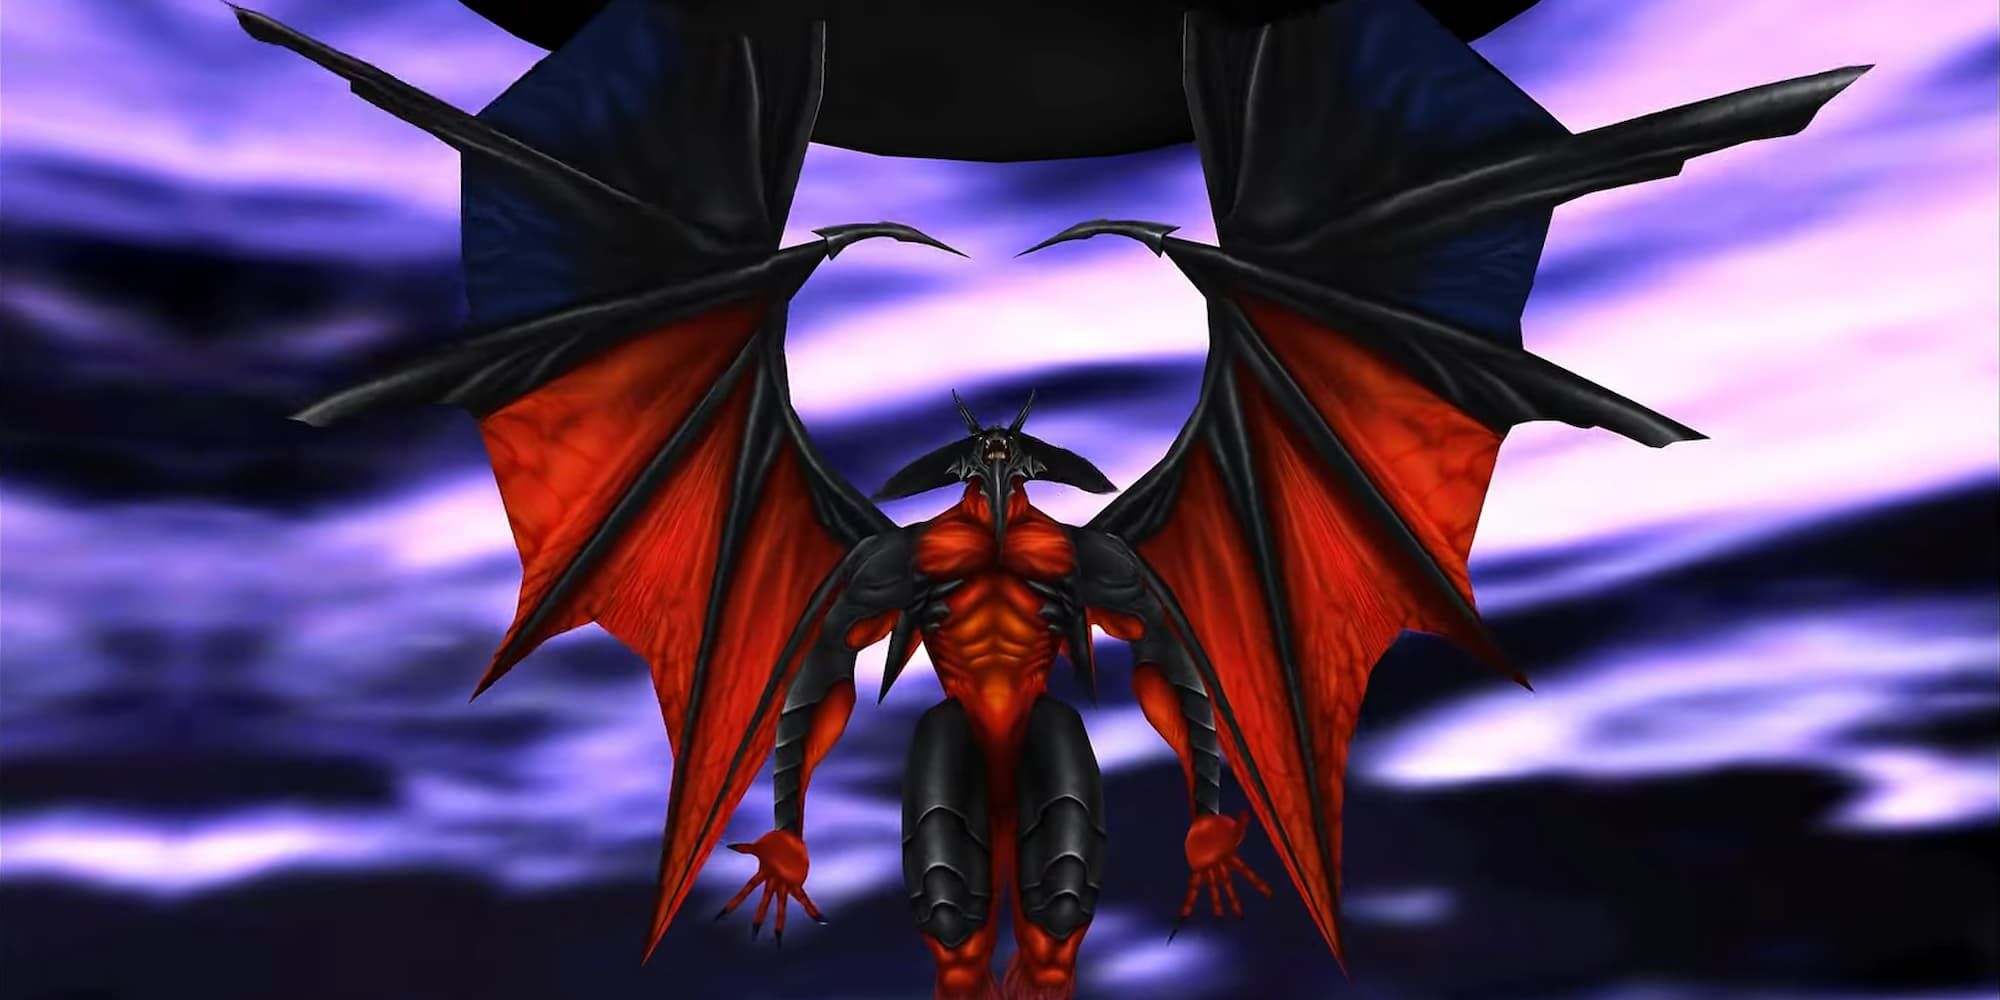 FF8 Diablos giant red and black devil like creature ready to charge an attack